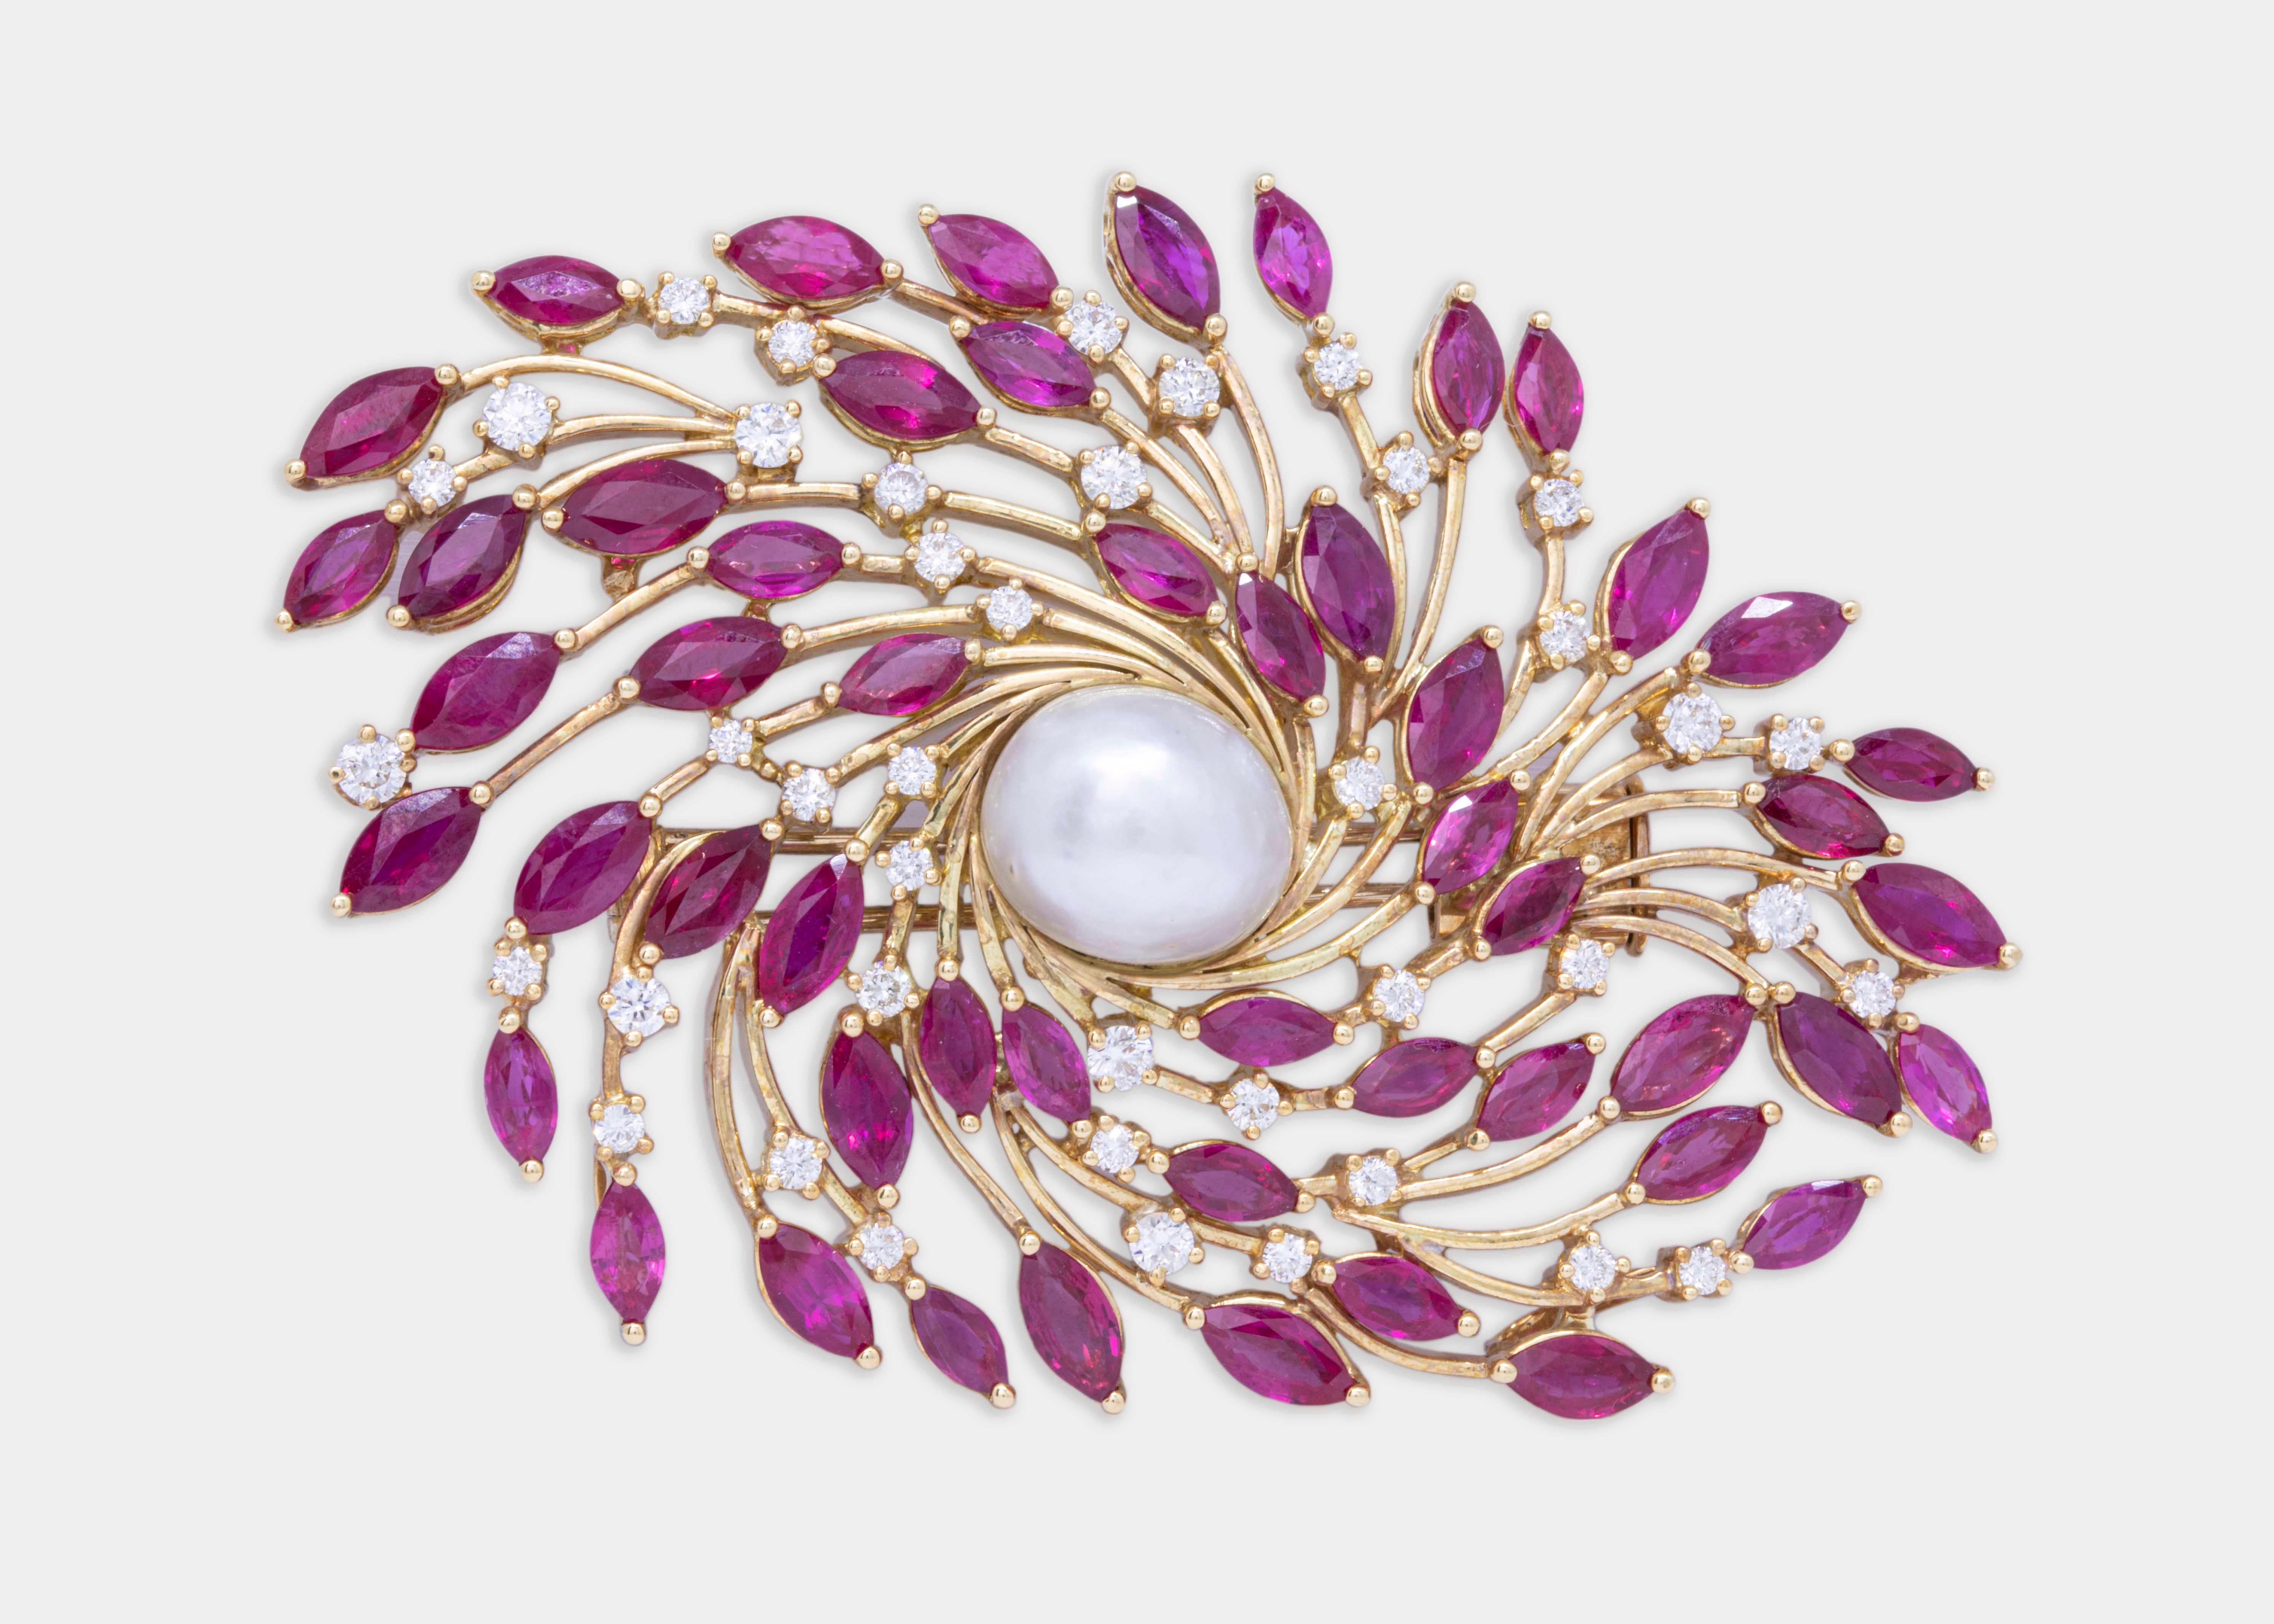 A one of its kind brooch inspired by whirling Dervishes. 

The 18k yellow gold swirls are centred with a natural Bahraini pearl button weighing 9.68 ct. with a diameter of 12.35 mm.

The pearl is surrounded with marquise shaped rubies and round VS1